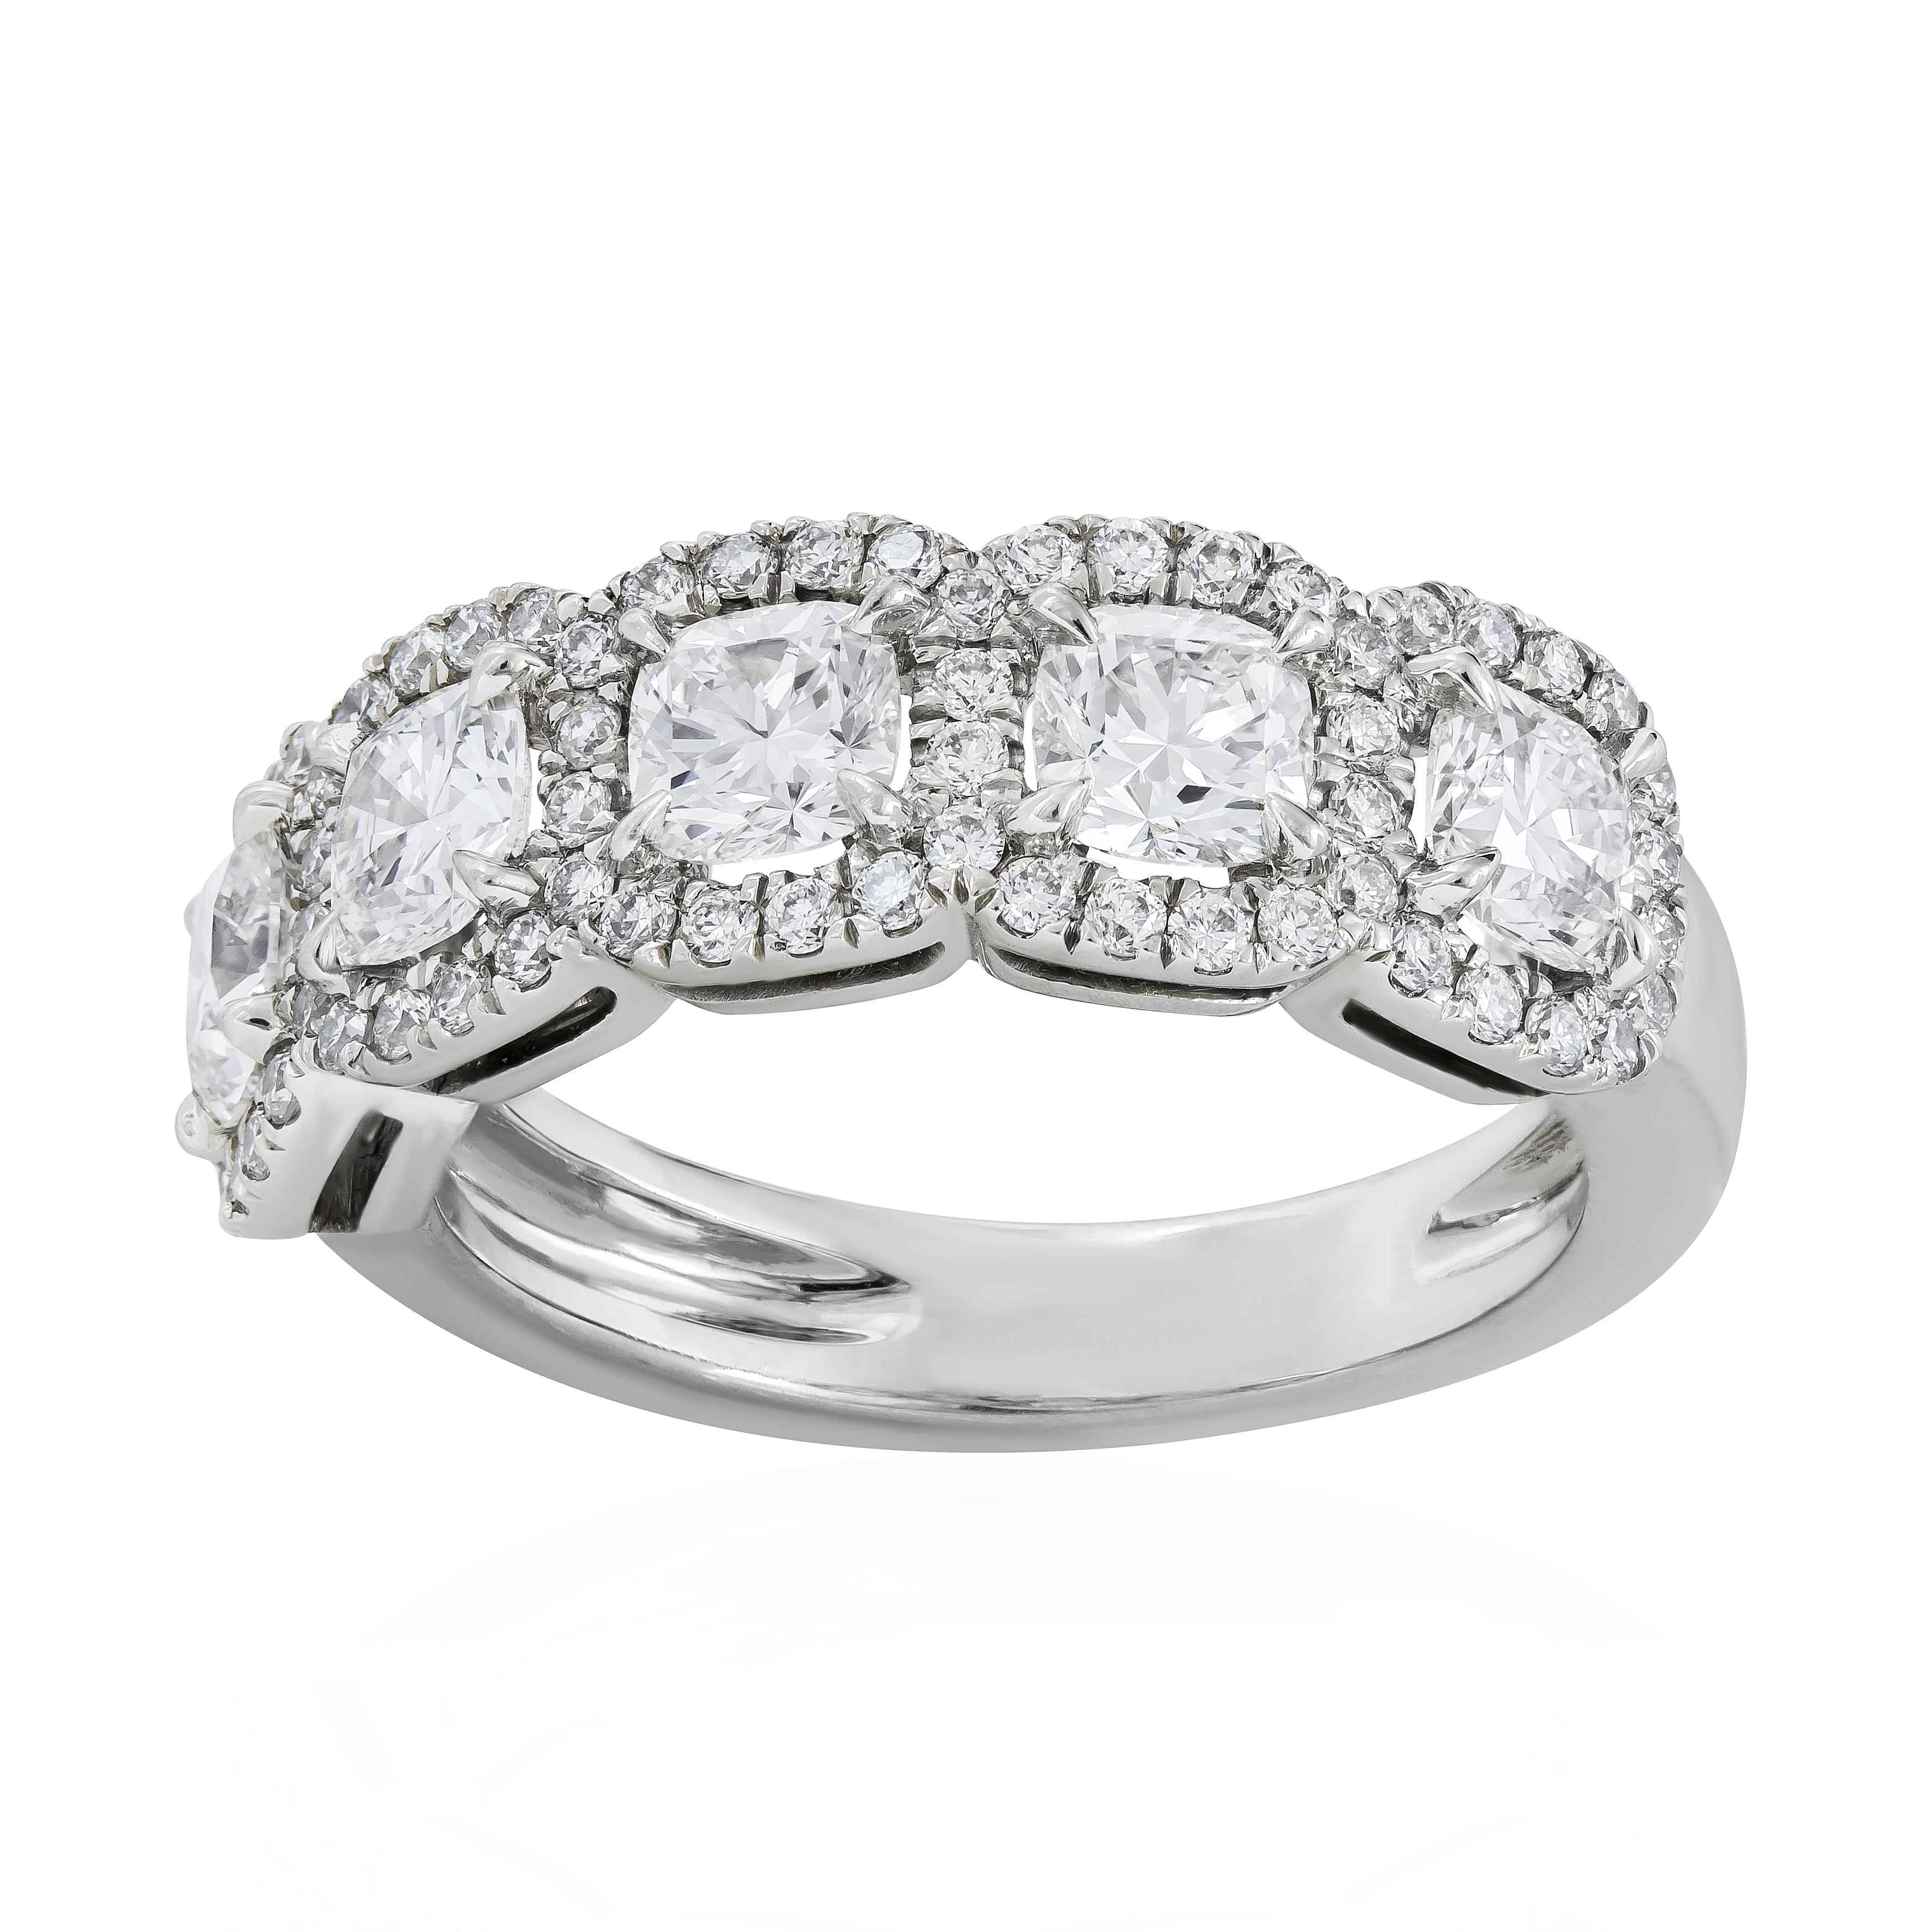 This an incredibly unique yet beautiful wedding band featuring 5 perfectly matched cushion cut diamonds weigh 1.54 carats total. The diamonds are approximately G color, VS clarity. Each cushion diamond is elegantly set in a sparkling diamond